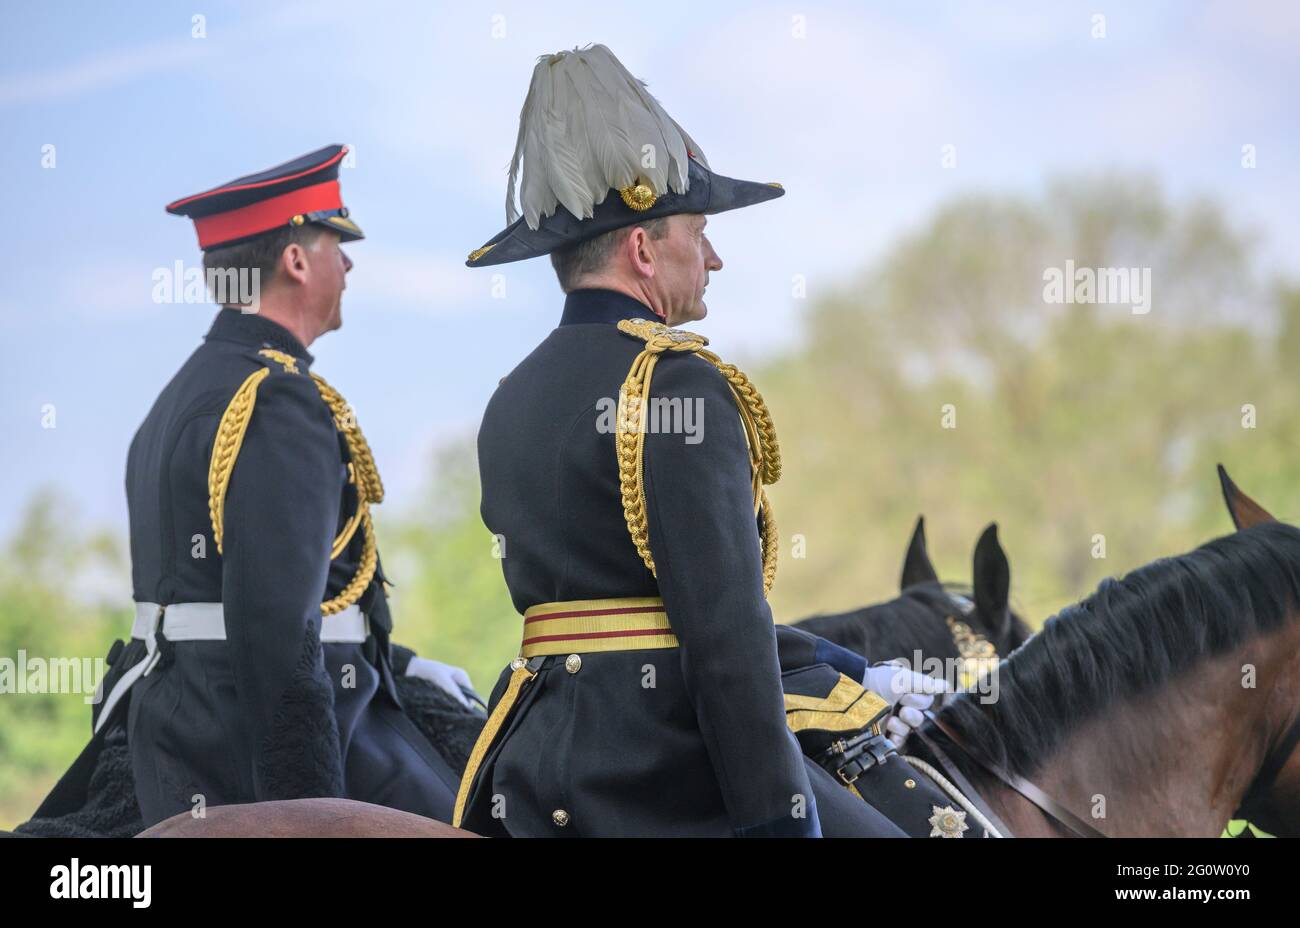 London, UK. 3 June 2021. 2021 Annual inspection of the Household Cavalry at Hyde Park by Major General Christopher John Ghika CBE the General Officer Commanding (right in photograph). Credit: Malcolm Park/Alamy Live News. Stock Photo